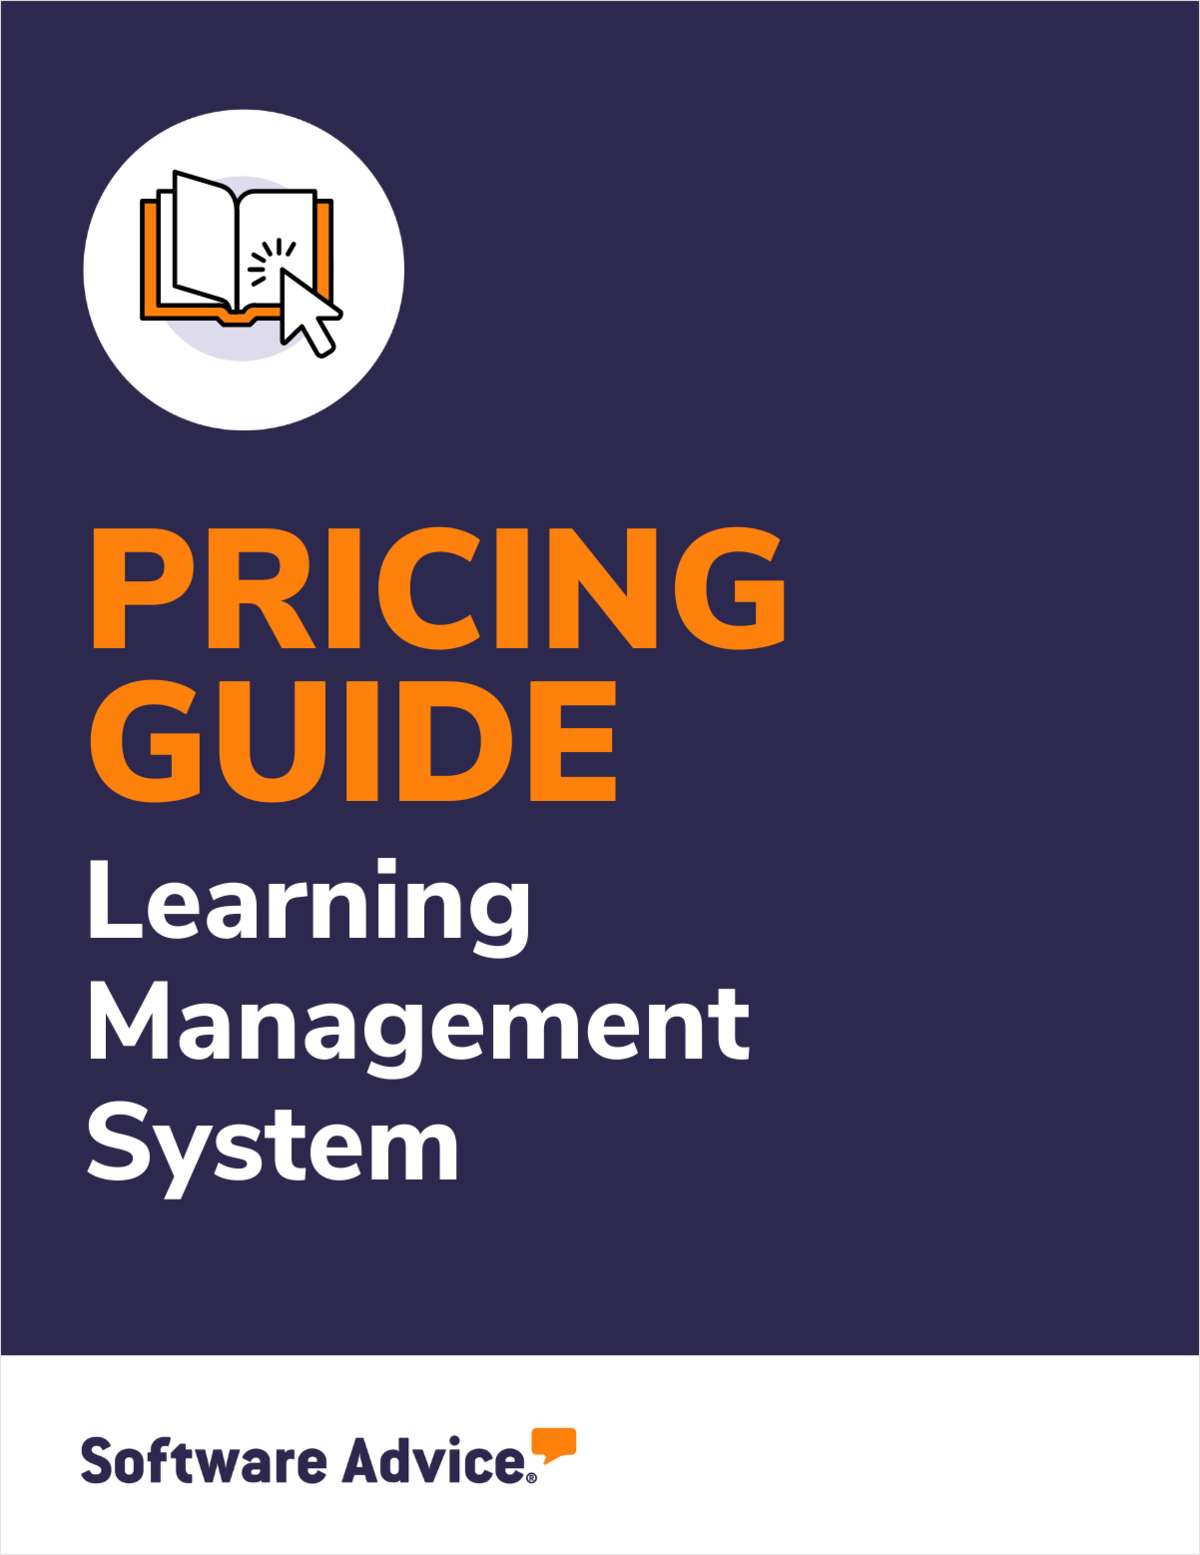 New for 2023: Software Advice's LMS Software Pricing Guide